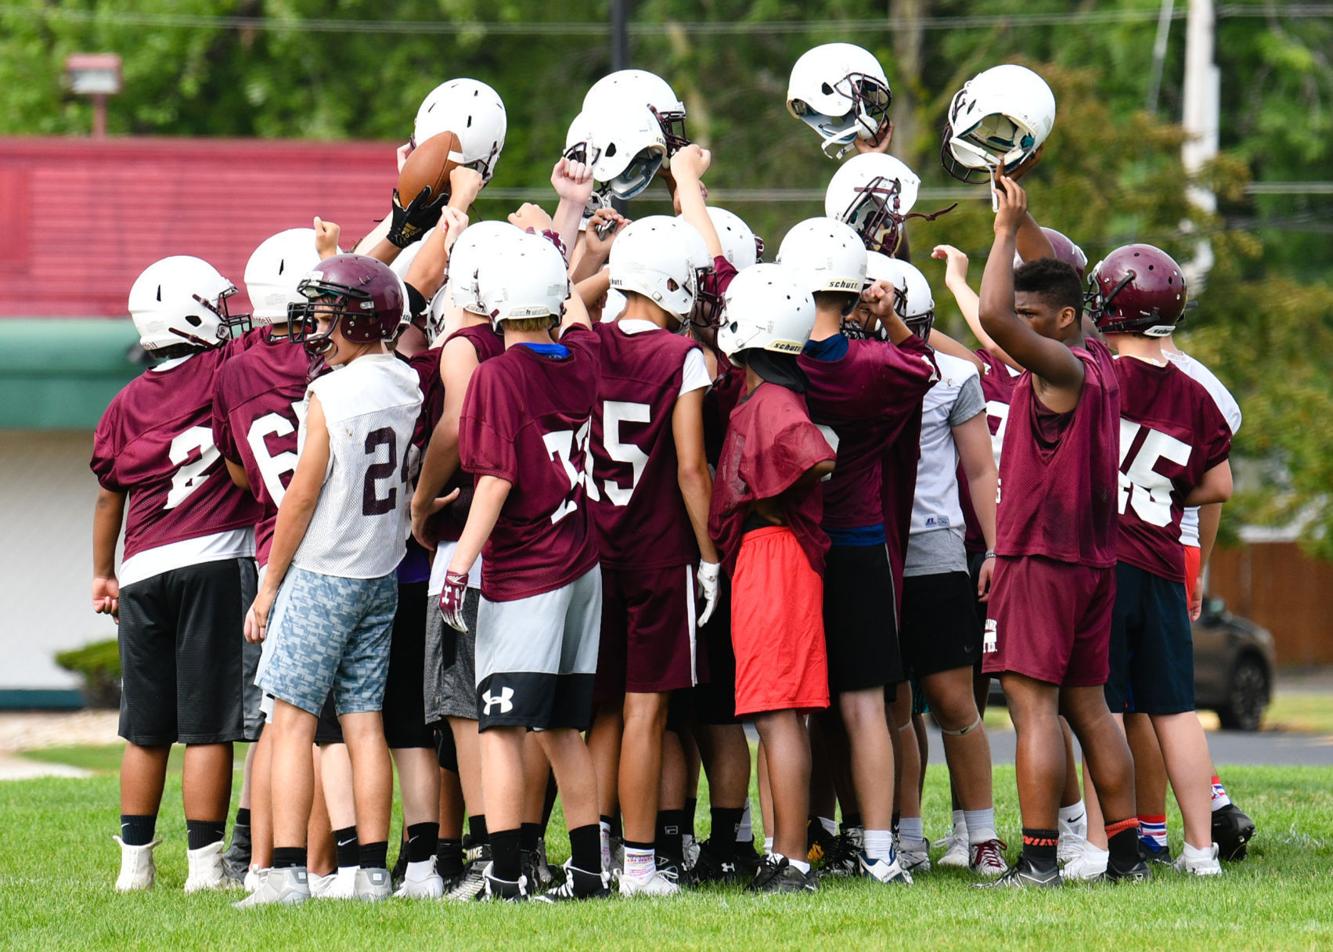 Moline hoping to have as much fun as last season